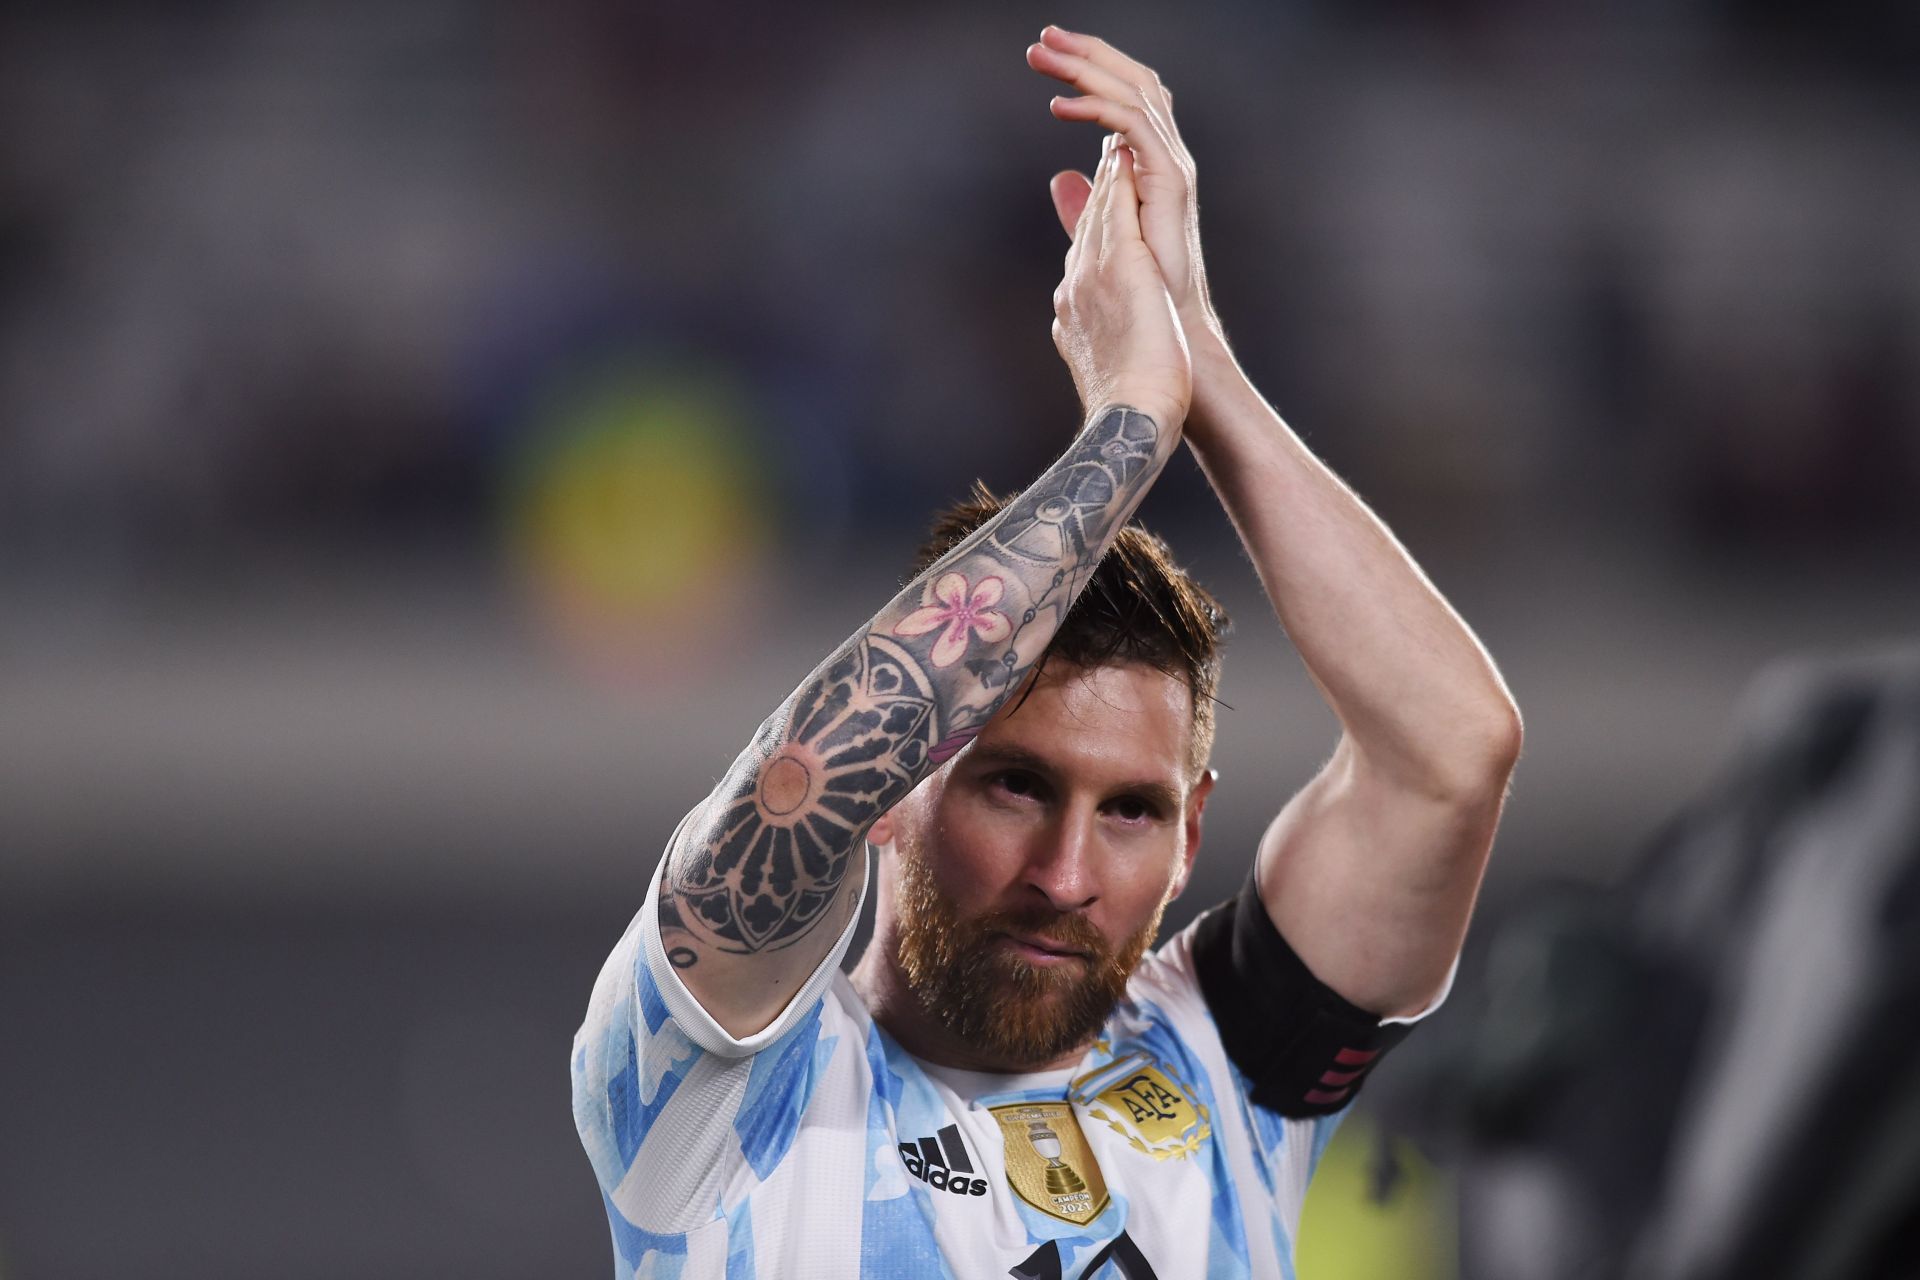 Lionel Messi has been one of the standout Argentine players this year.